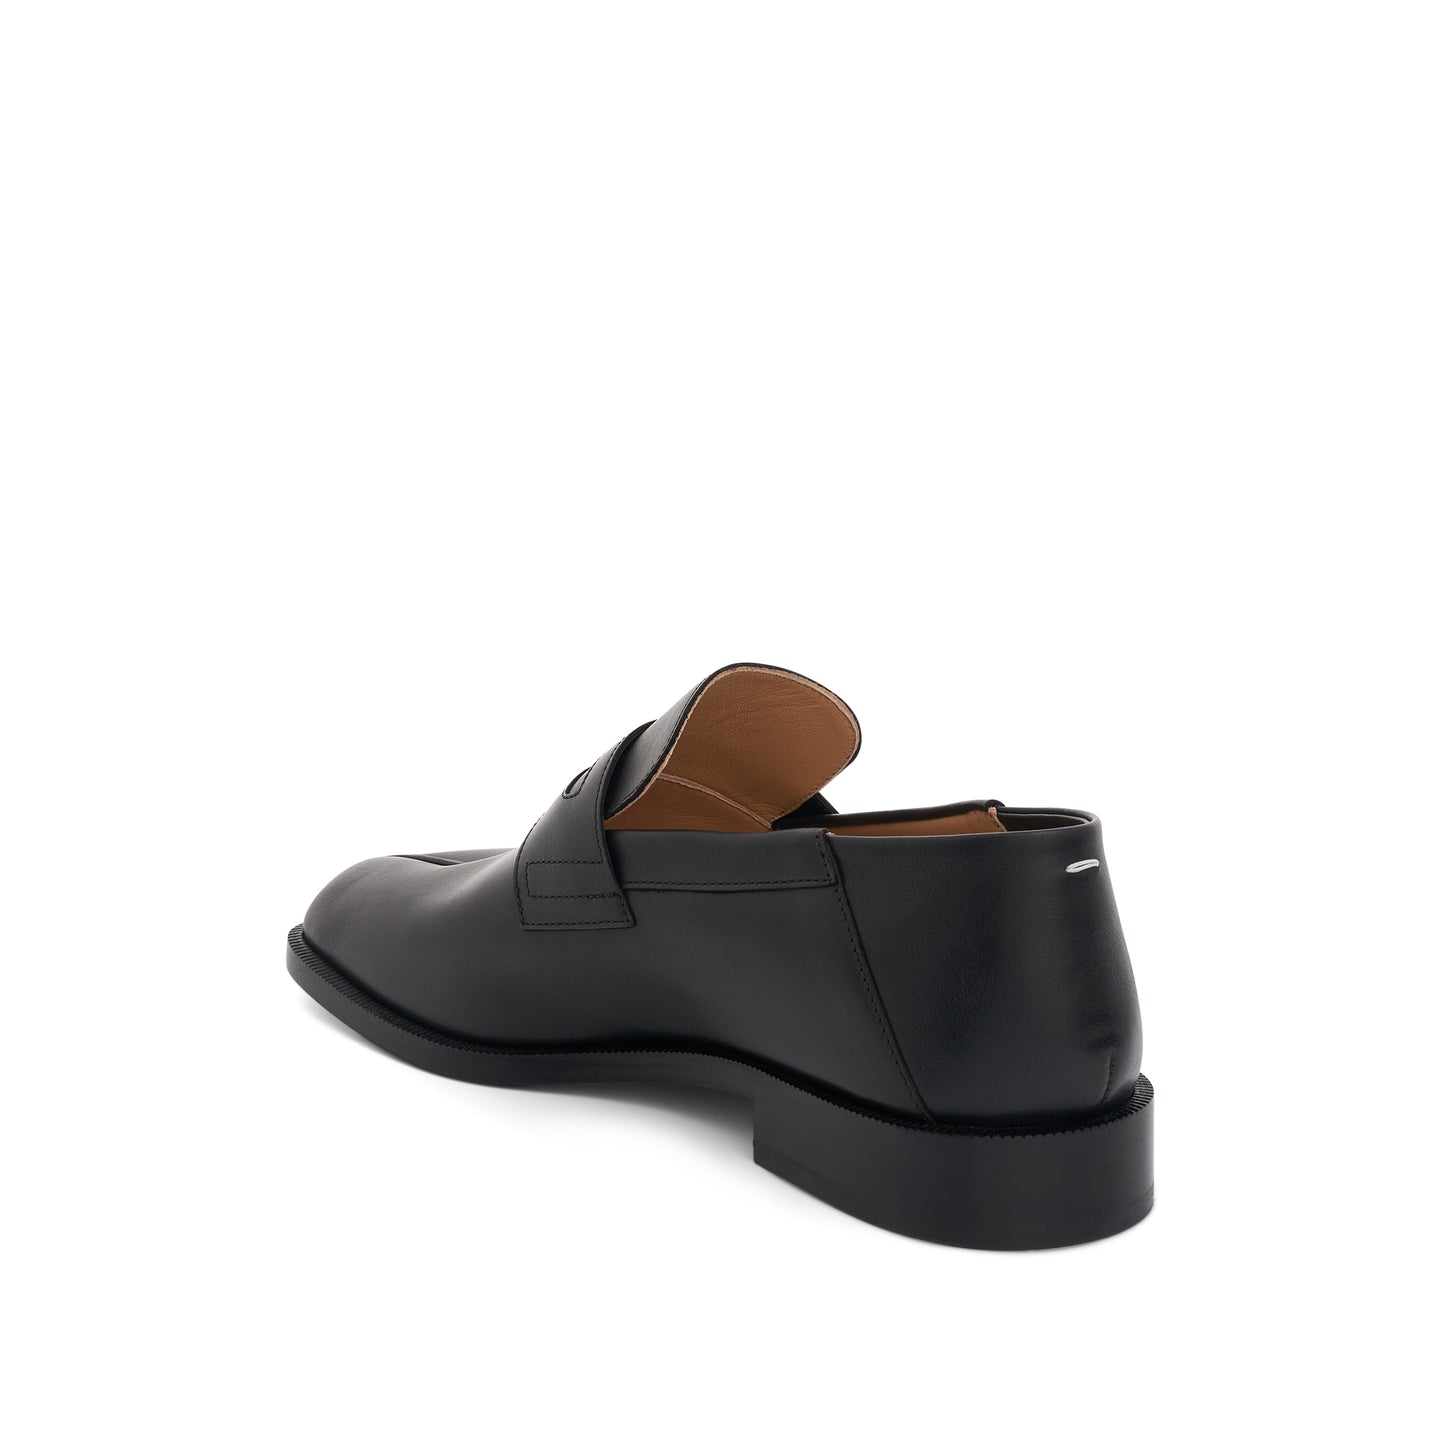 Tabi Leather Loafers in Black